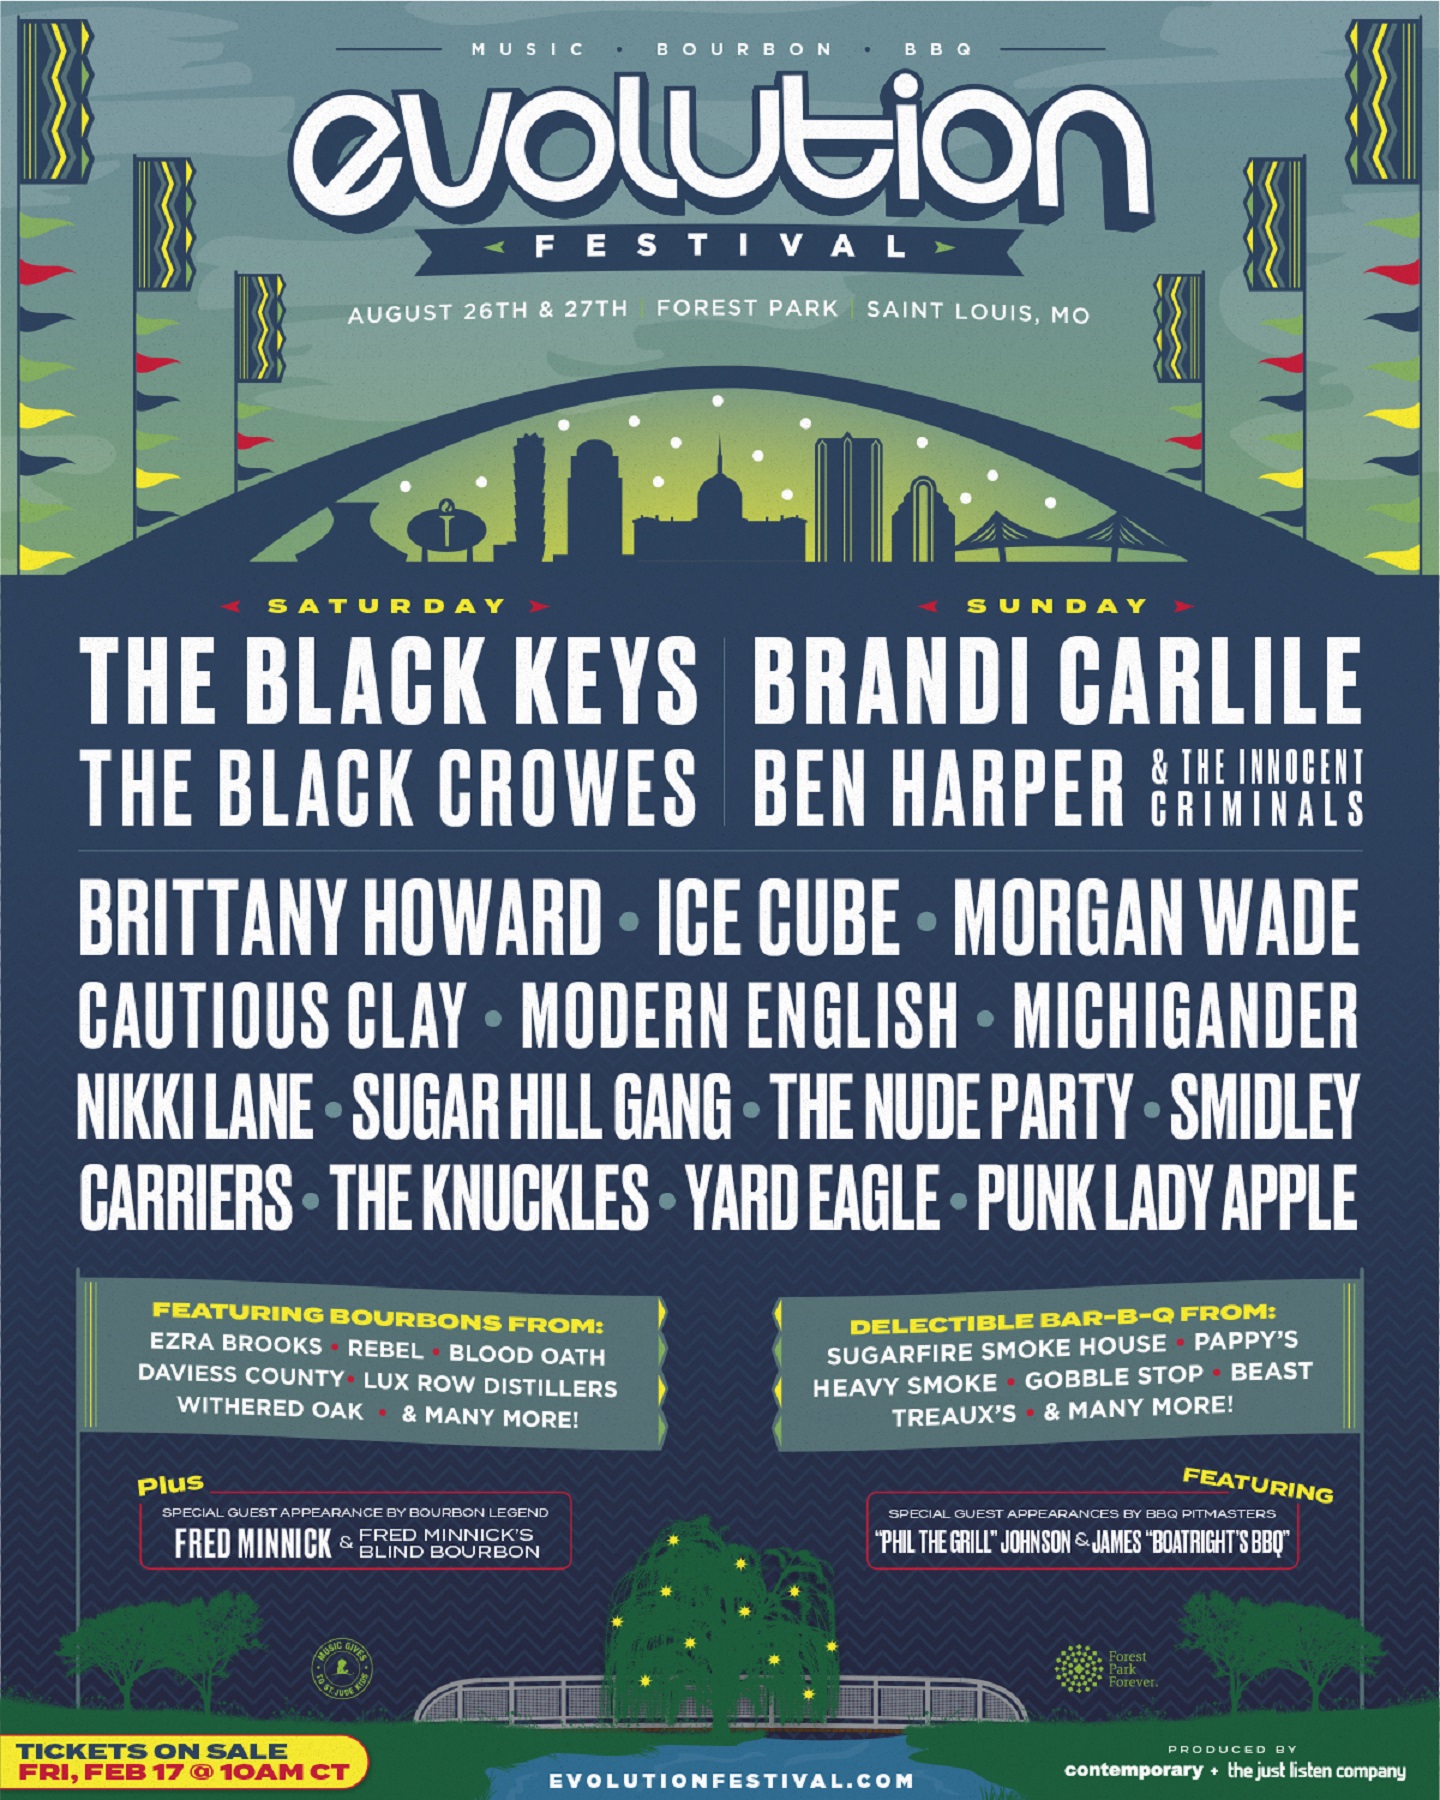 BRANDI CARLILE, THE BLACK KEYS, THE BLACK CROWES, BEN HARPER, BRITTANY HOWARD, AND MORE TO PERFORM AT INAUGURAL EVOLUTION FESTIVAL 